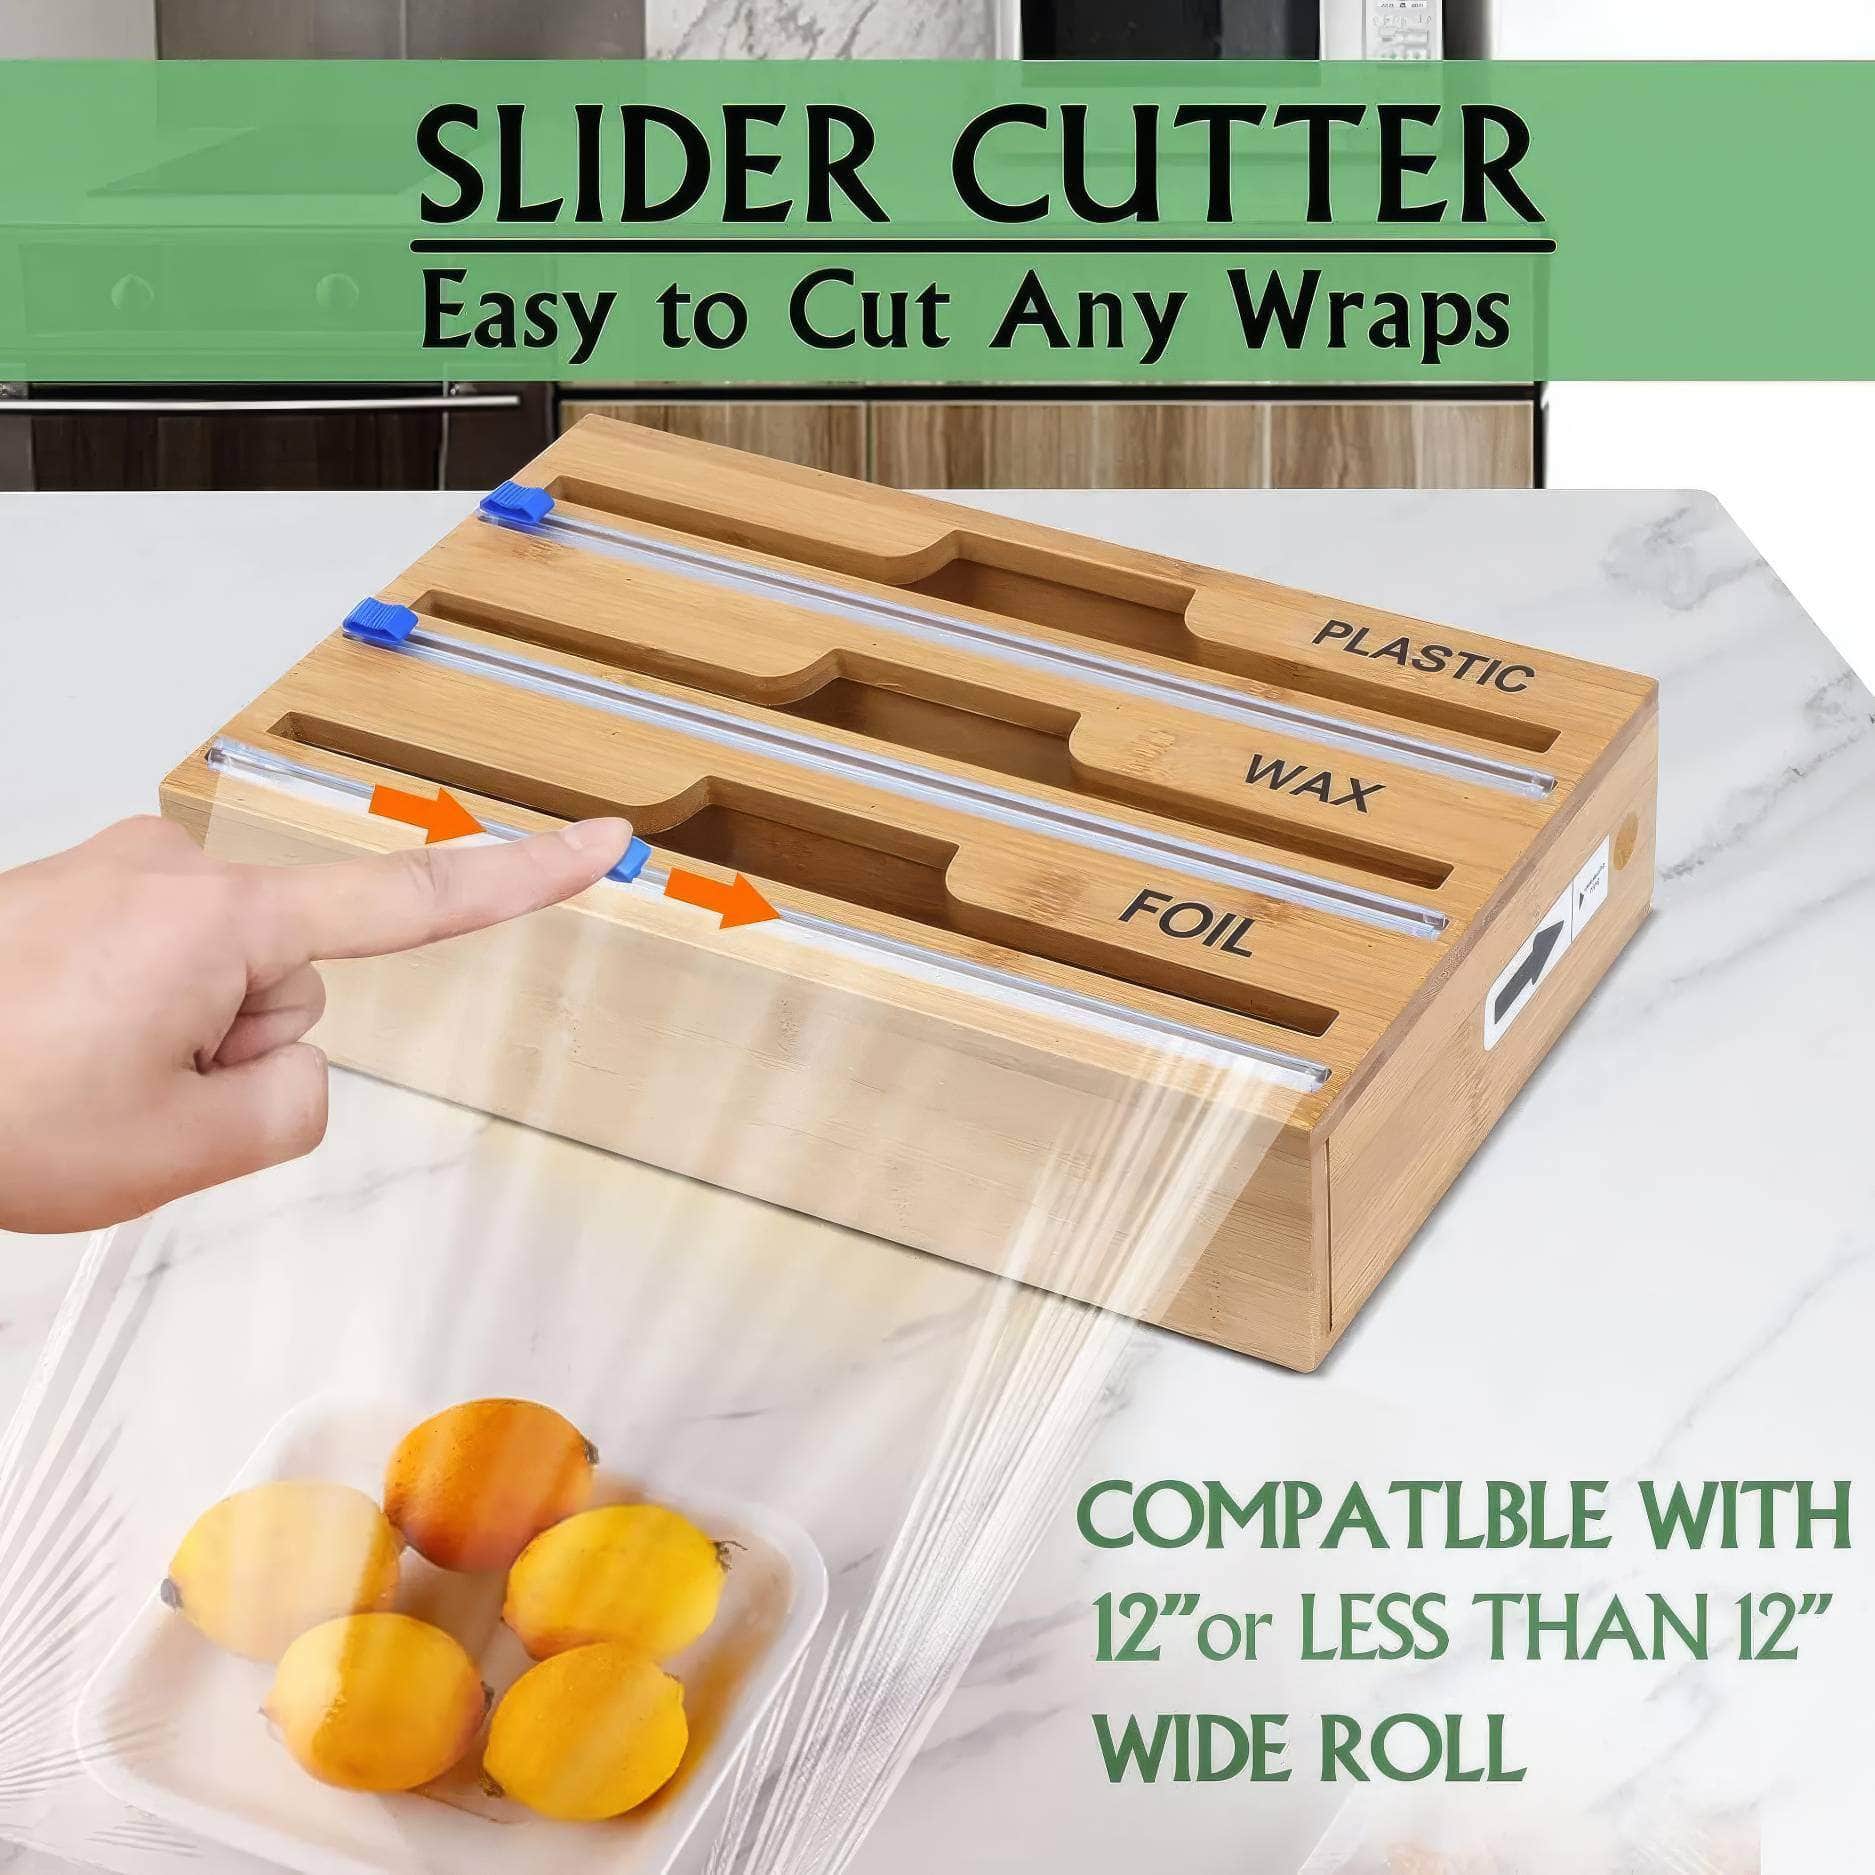 Wall Mounted Wooden Cling Film Cutter - Minimalist Kitchenware with Multi-Compartment, Multi-Layer Hidden Scratchers, Two-Way Cutter 33.5x21.9x7cm / 1pc Wooden Cutter